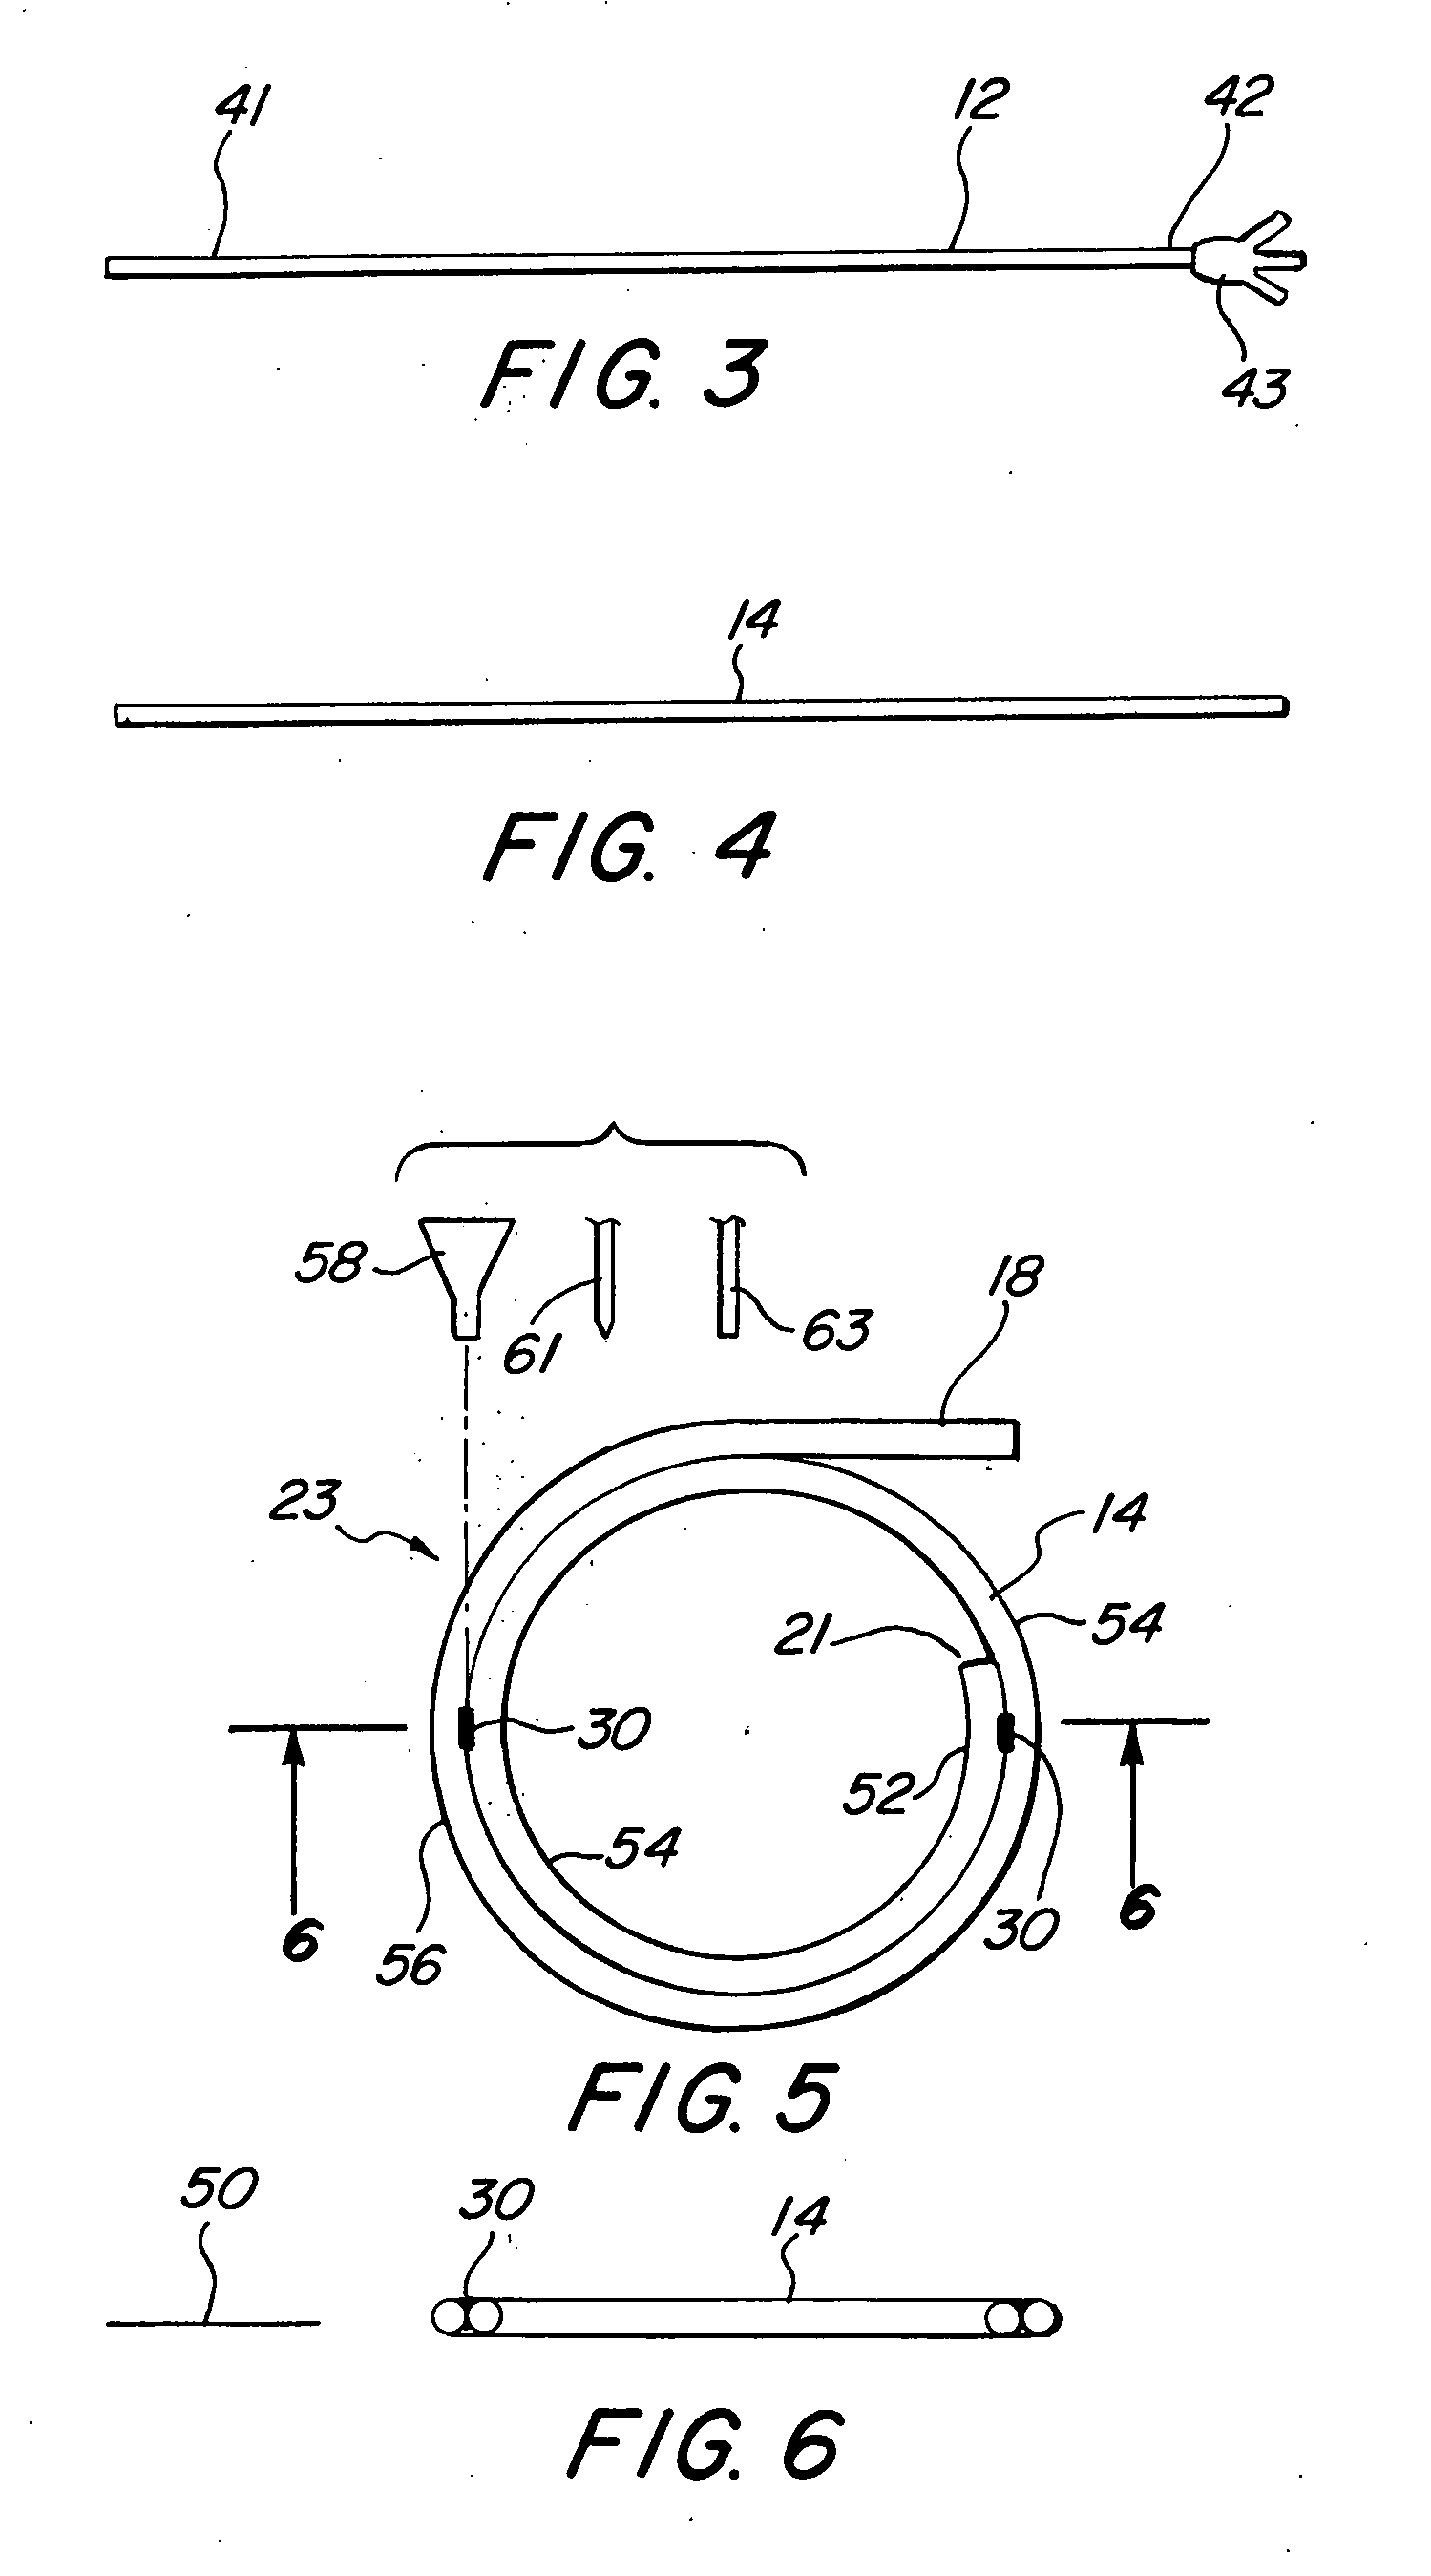 Apparatus and method for packaging elongate surgical devices